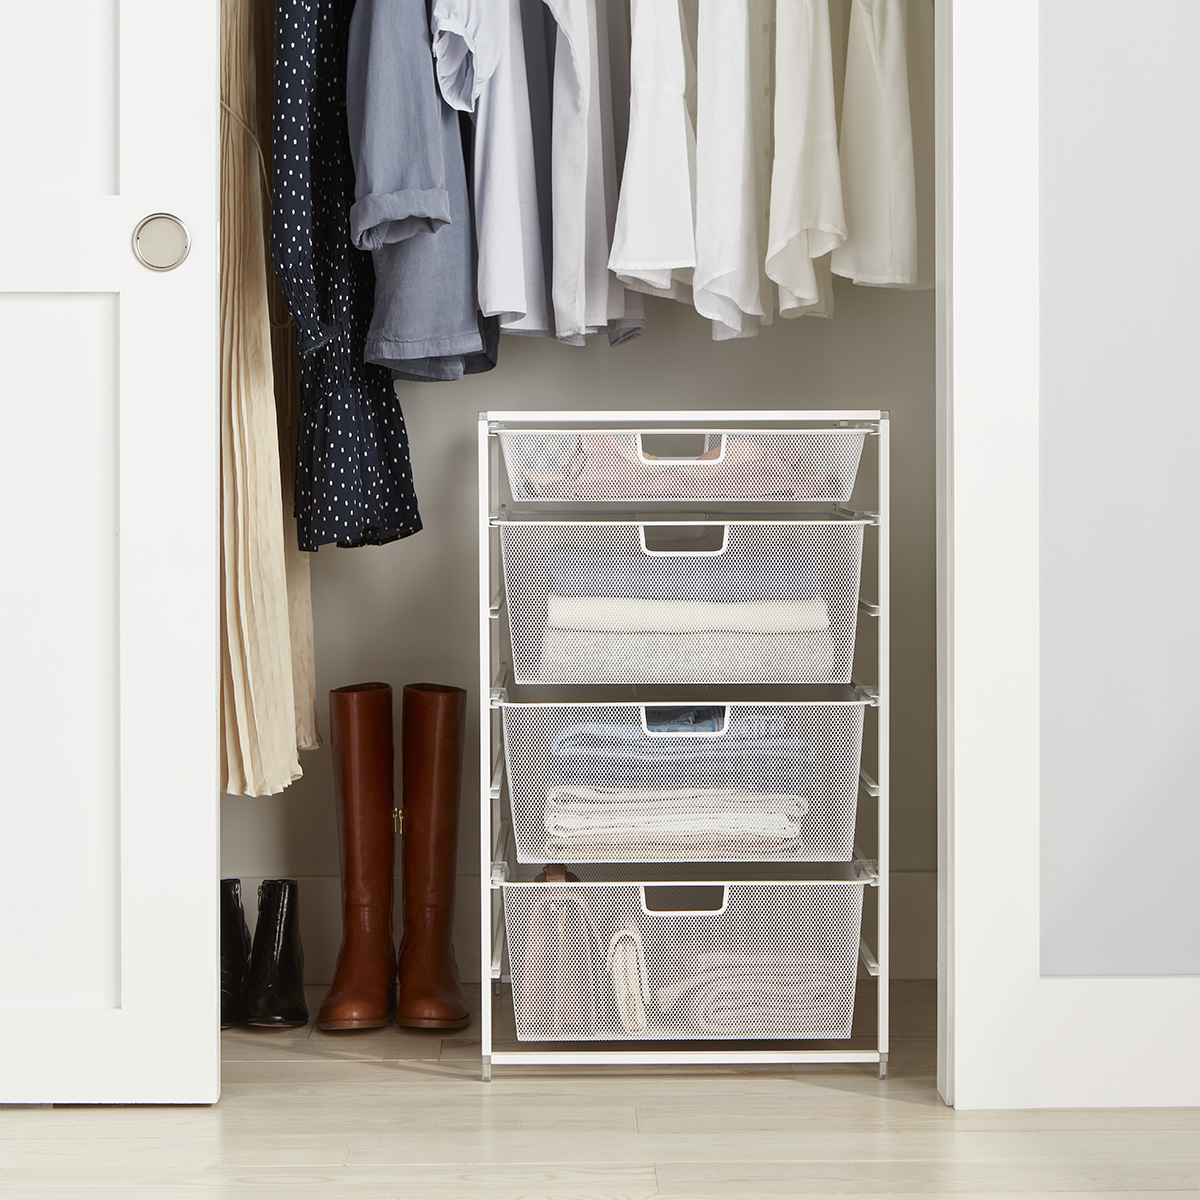 https://www.containerstore.com/catalogimages/494899/EL_10037598_med_7_runner_white_close.jpg